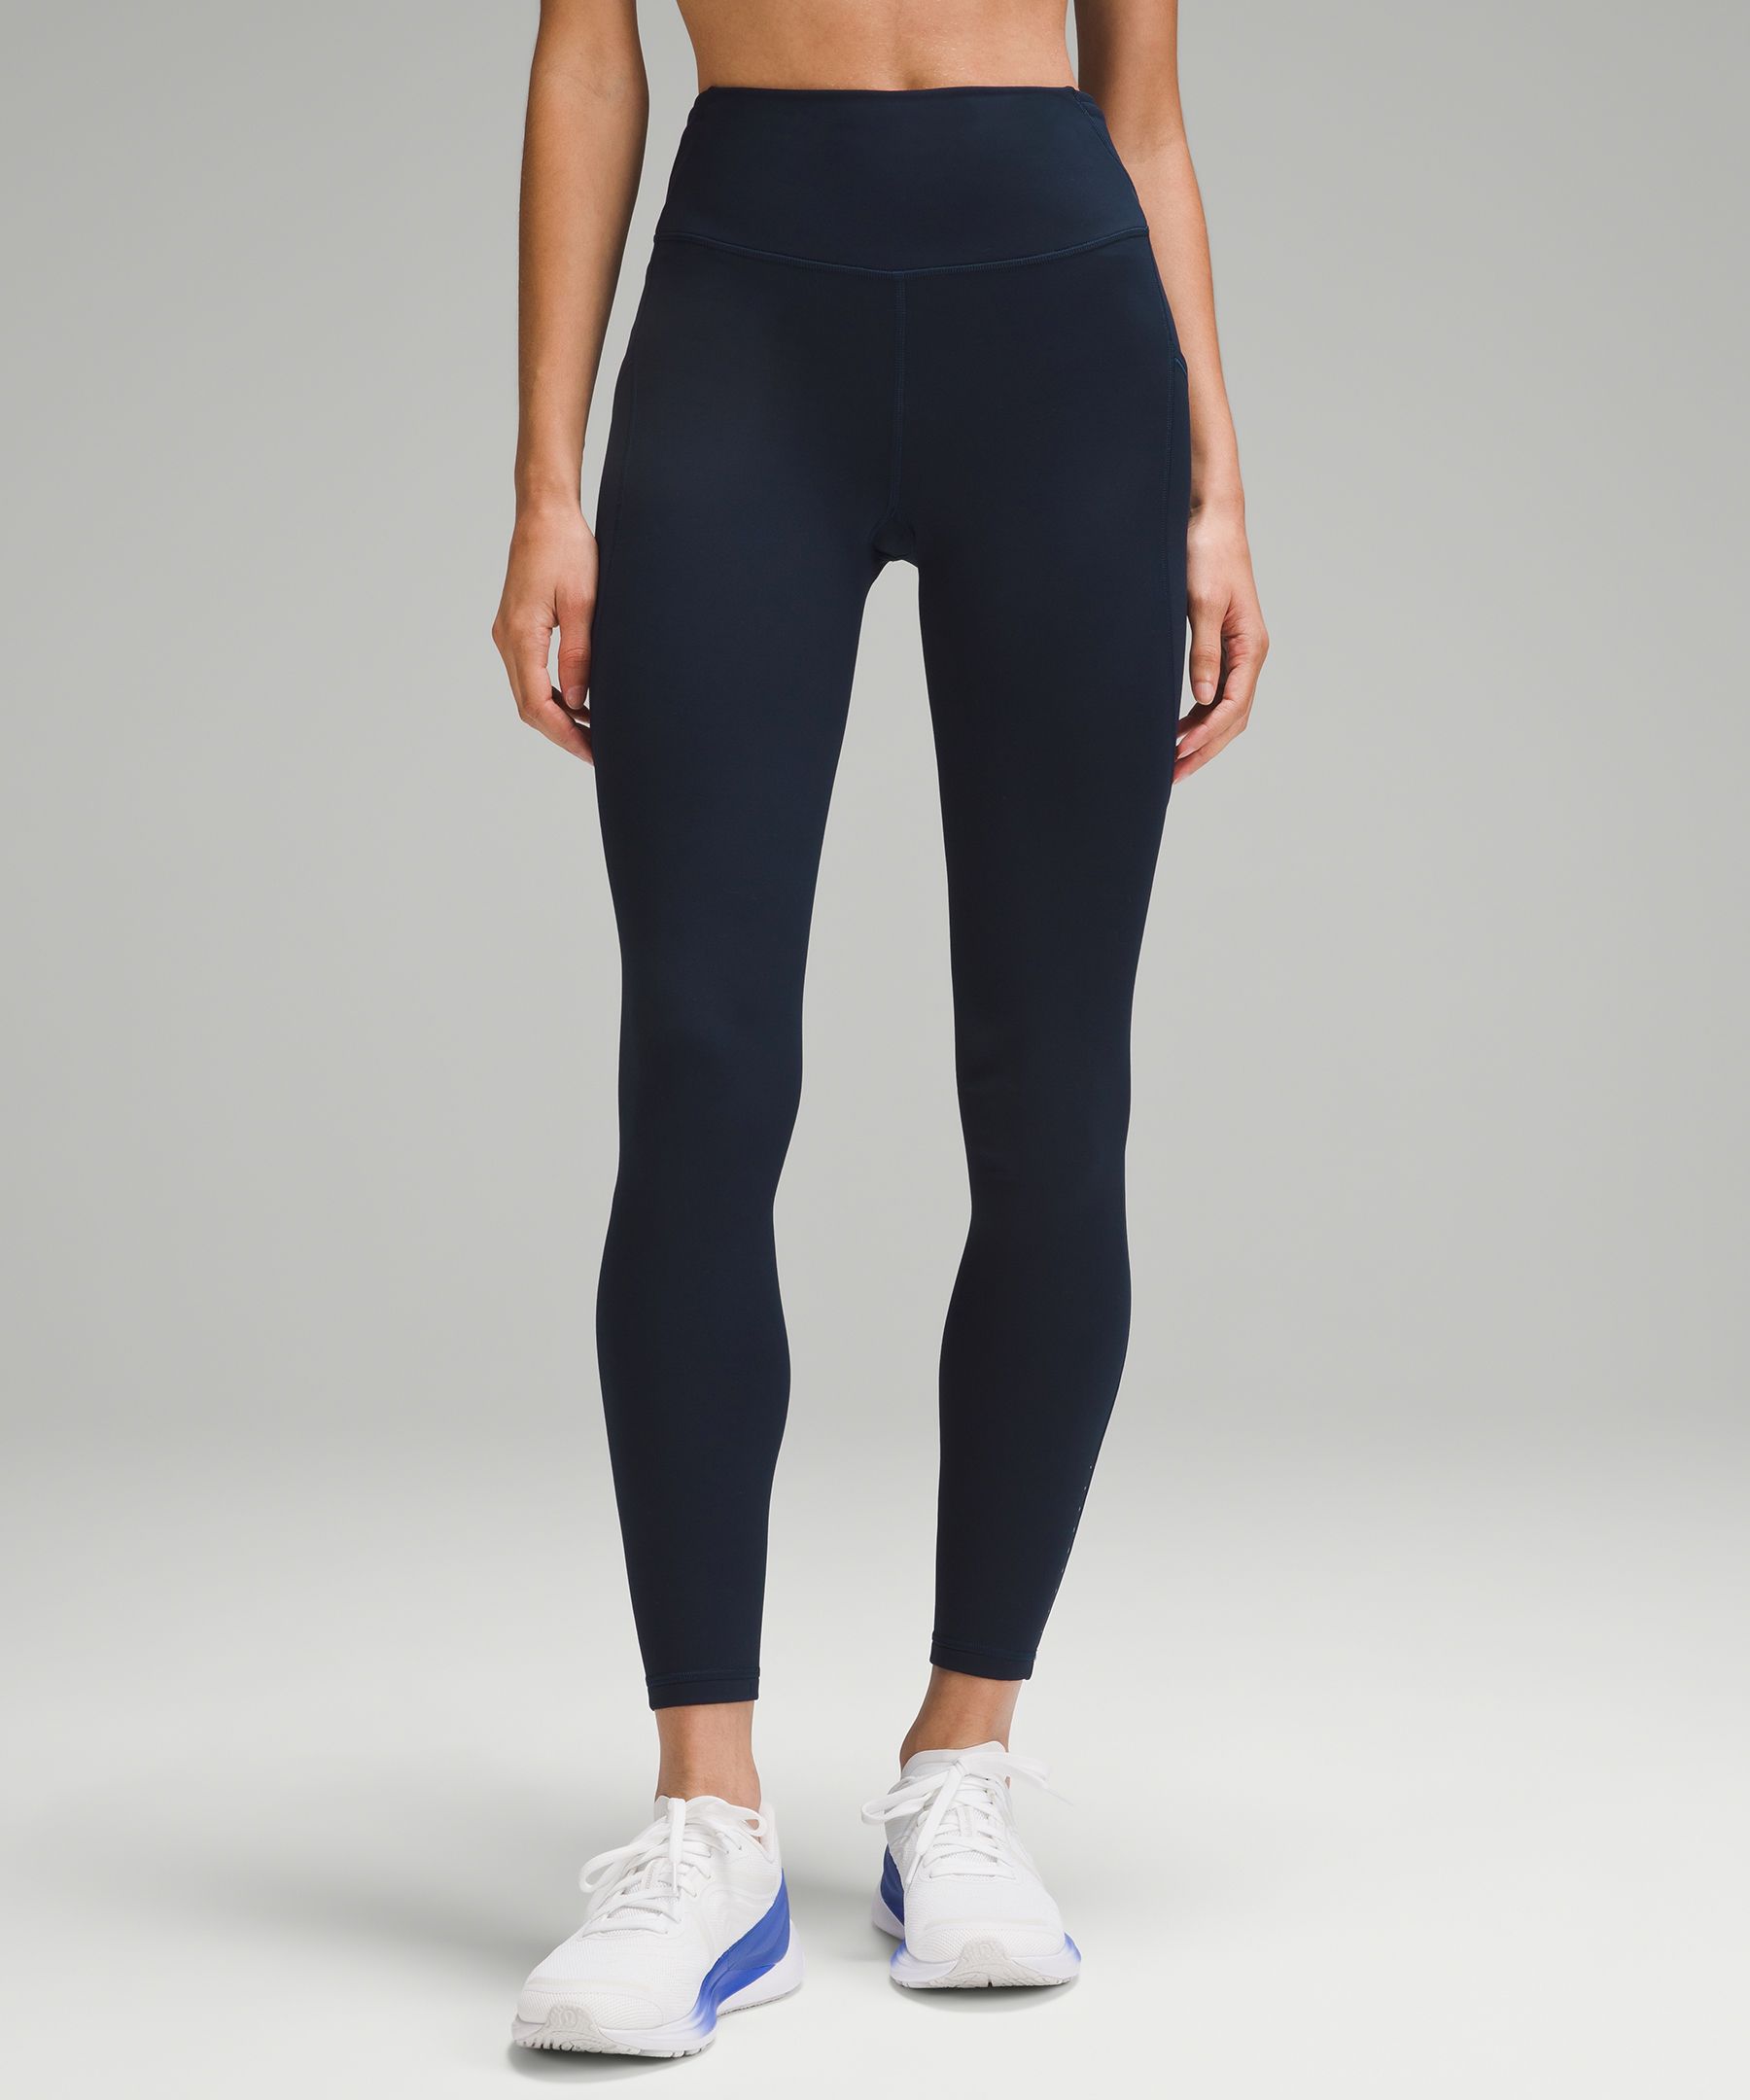 Fast and Free High-Rise Thermal Tight 28 *Pockets